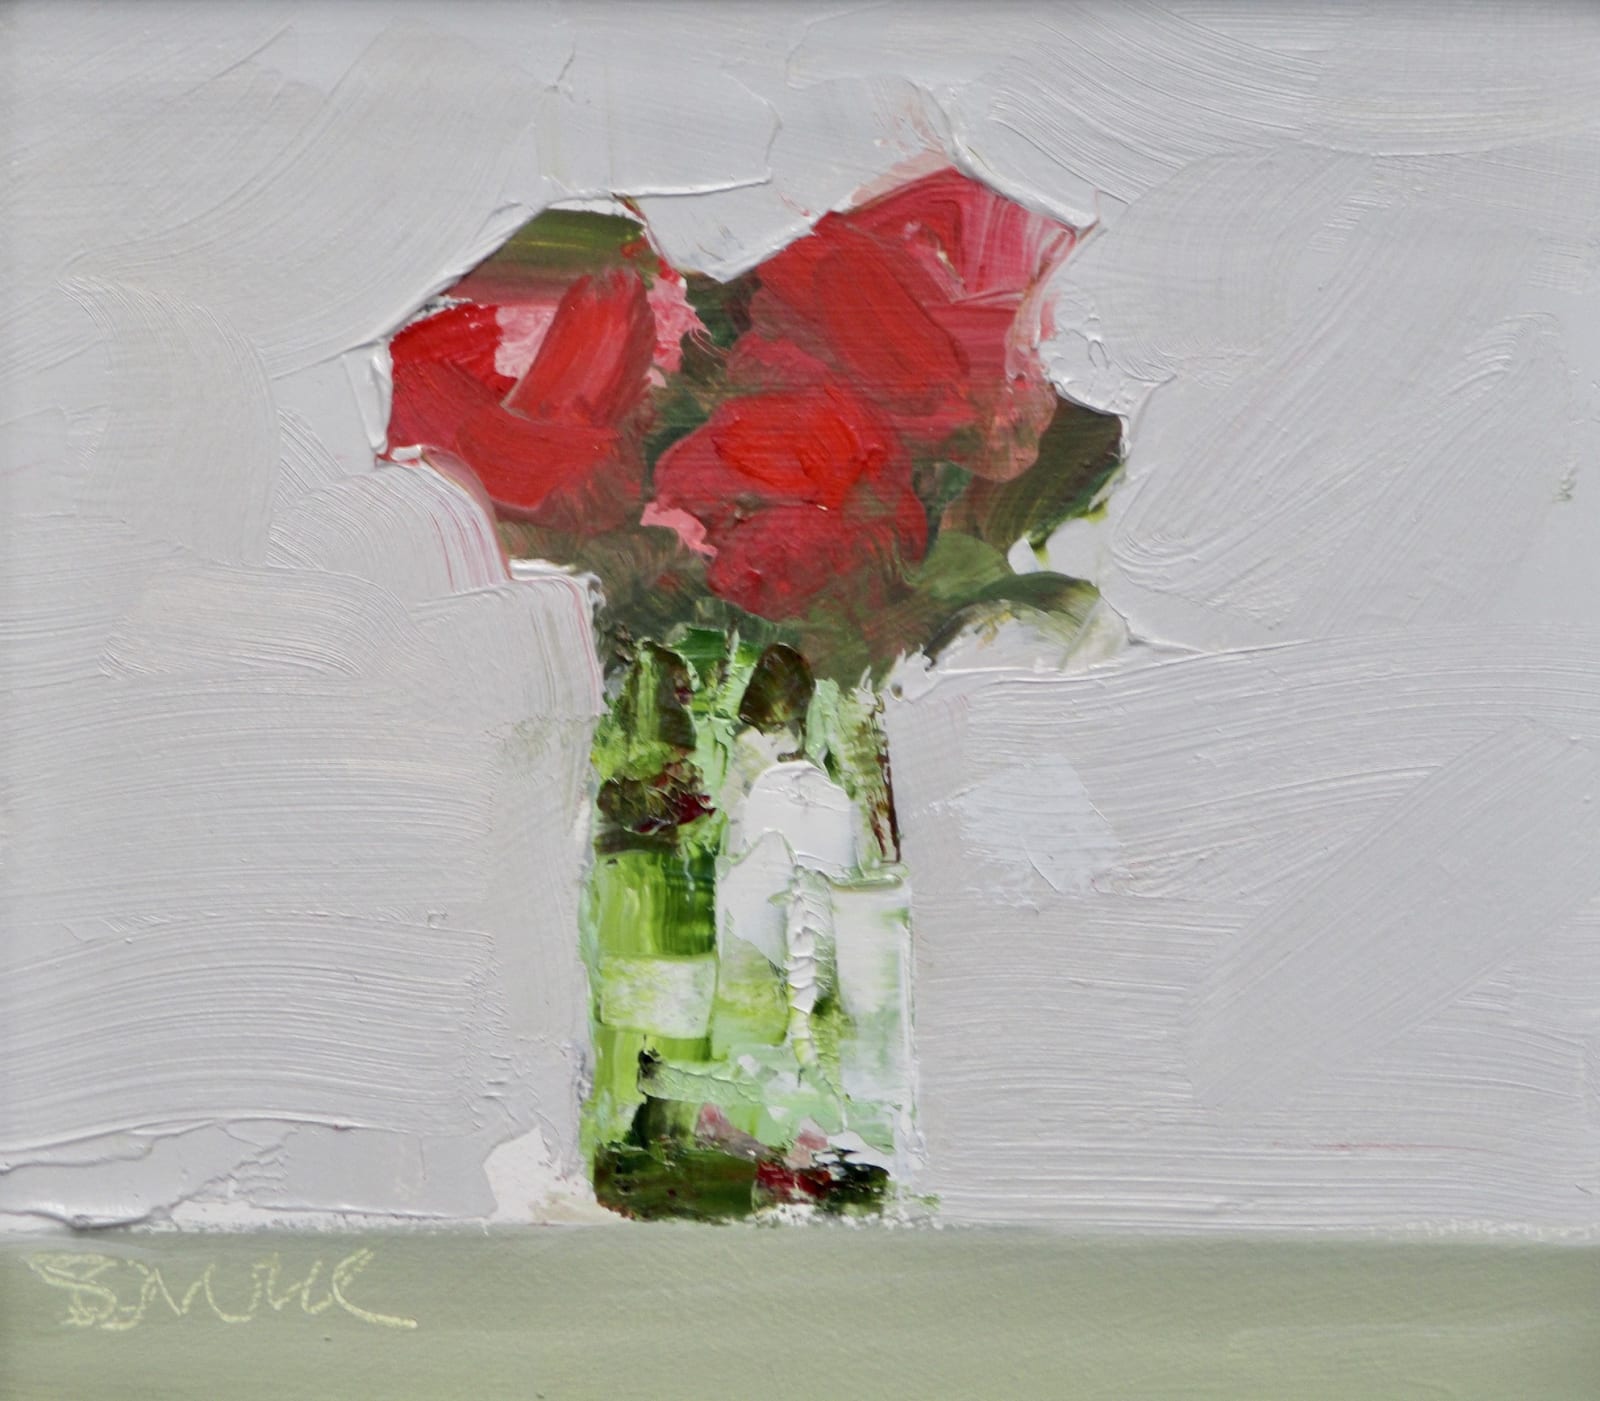 Mike Service, Roses in a Jam Jar , 2021